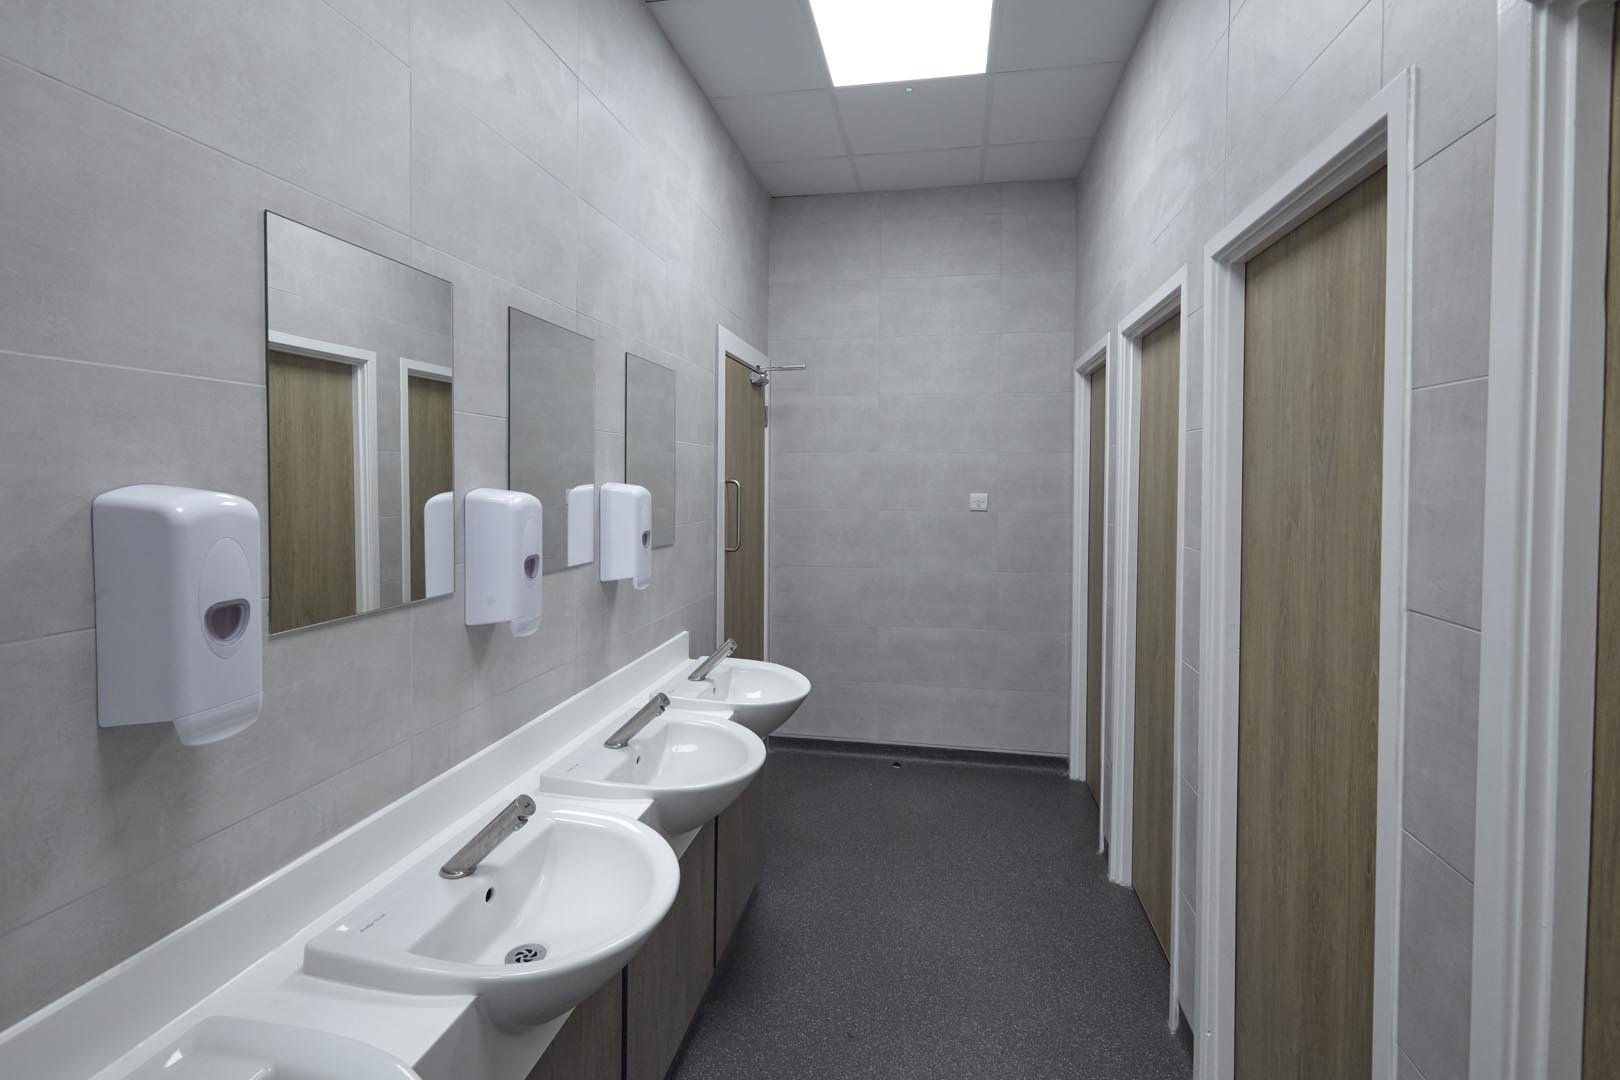 unisex staff toilets with woodgrain doors and vanity units at collingwood college.jpg